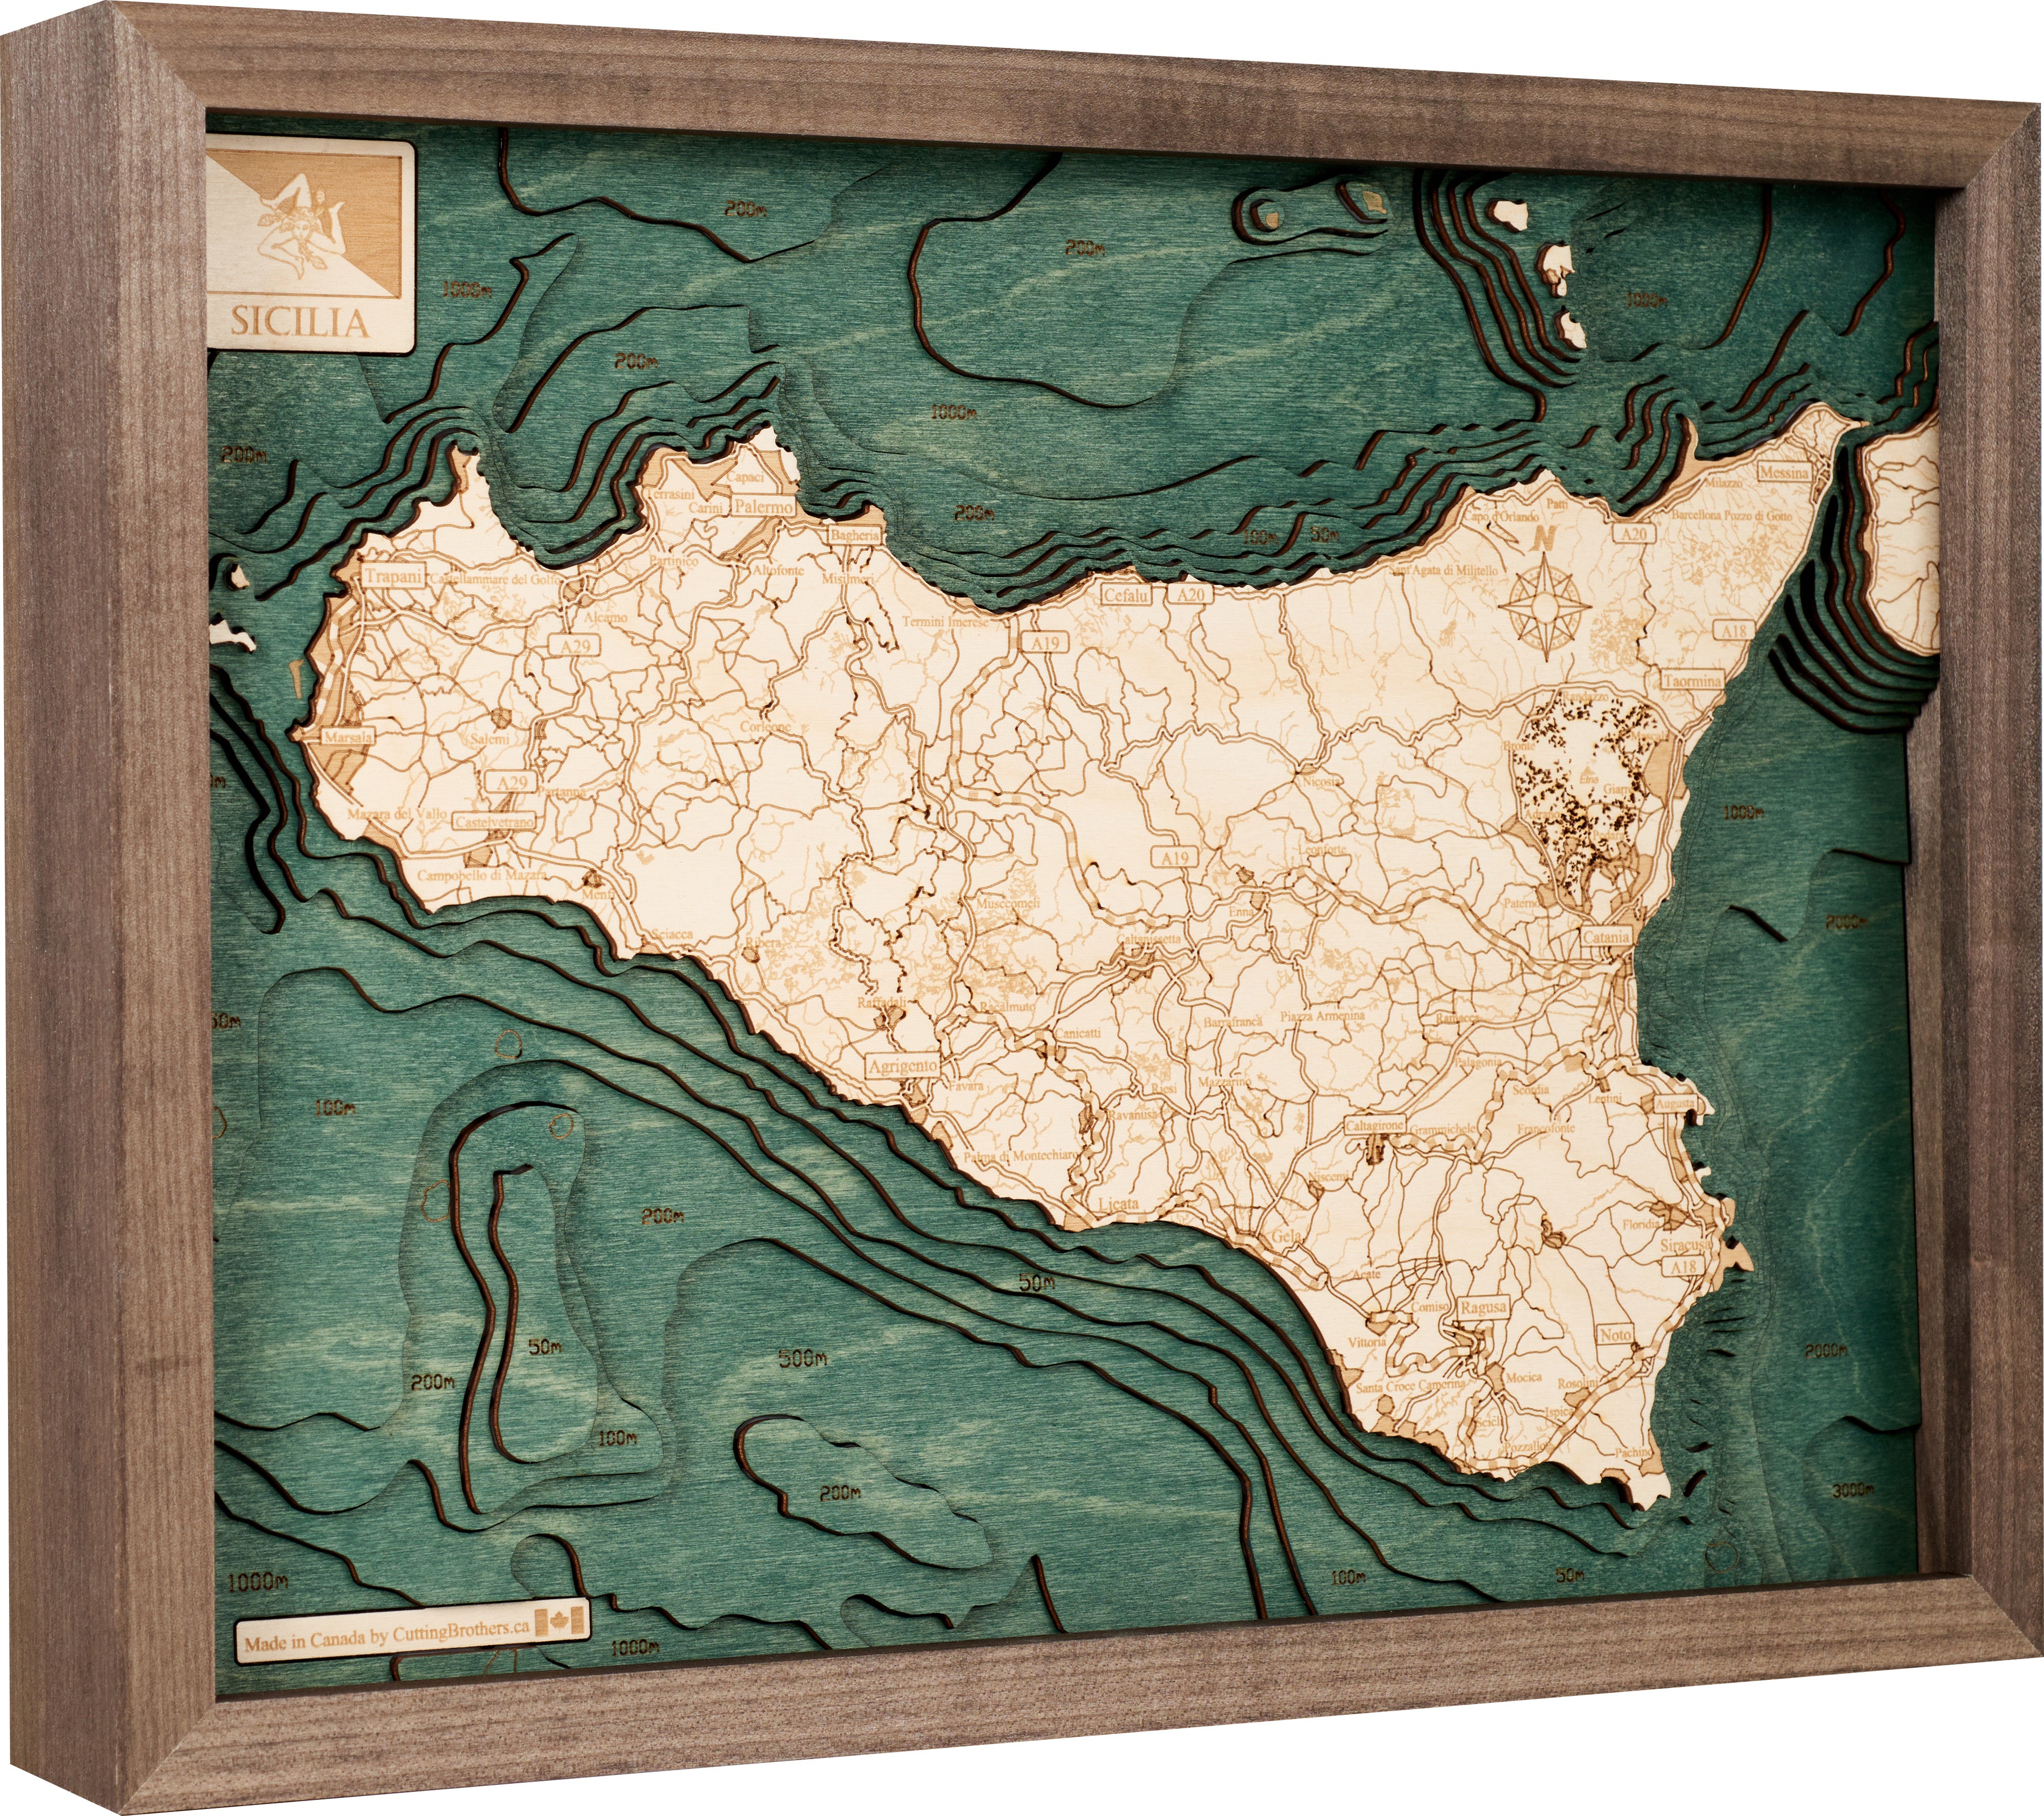 SICILY 3D Wooden Wall Map - Version S 